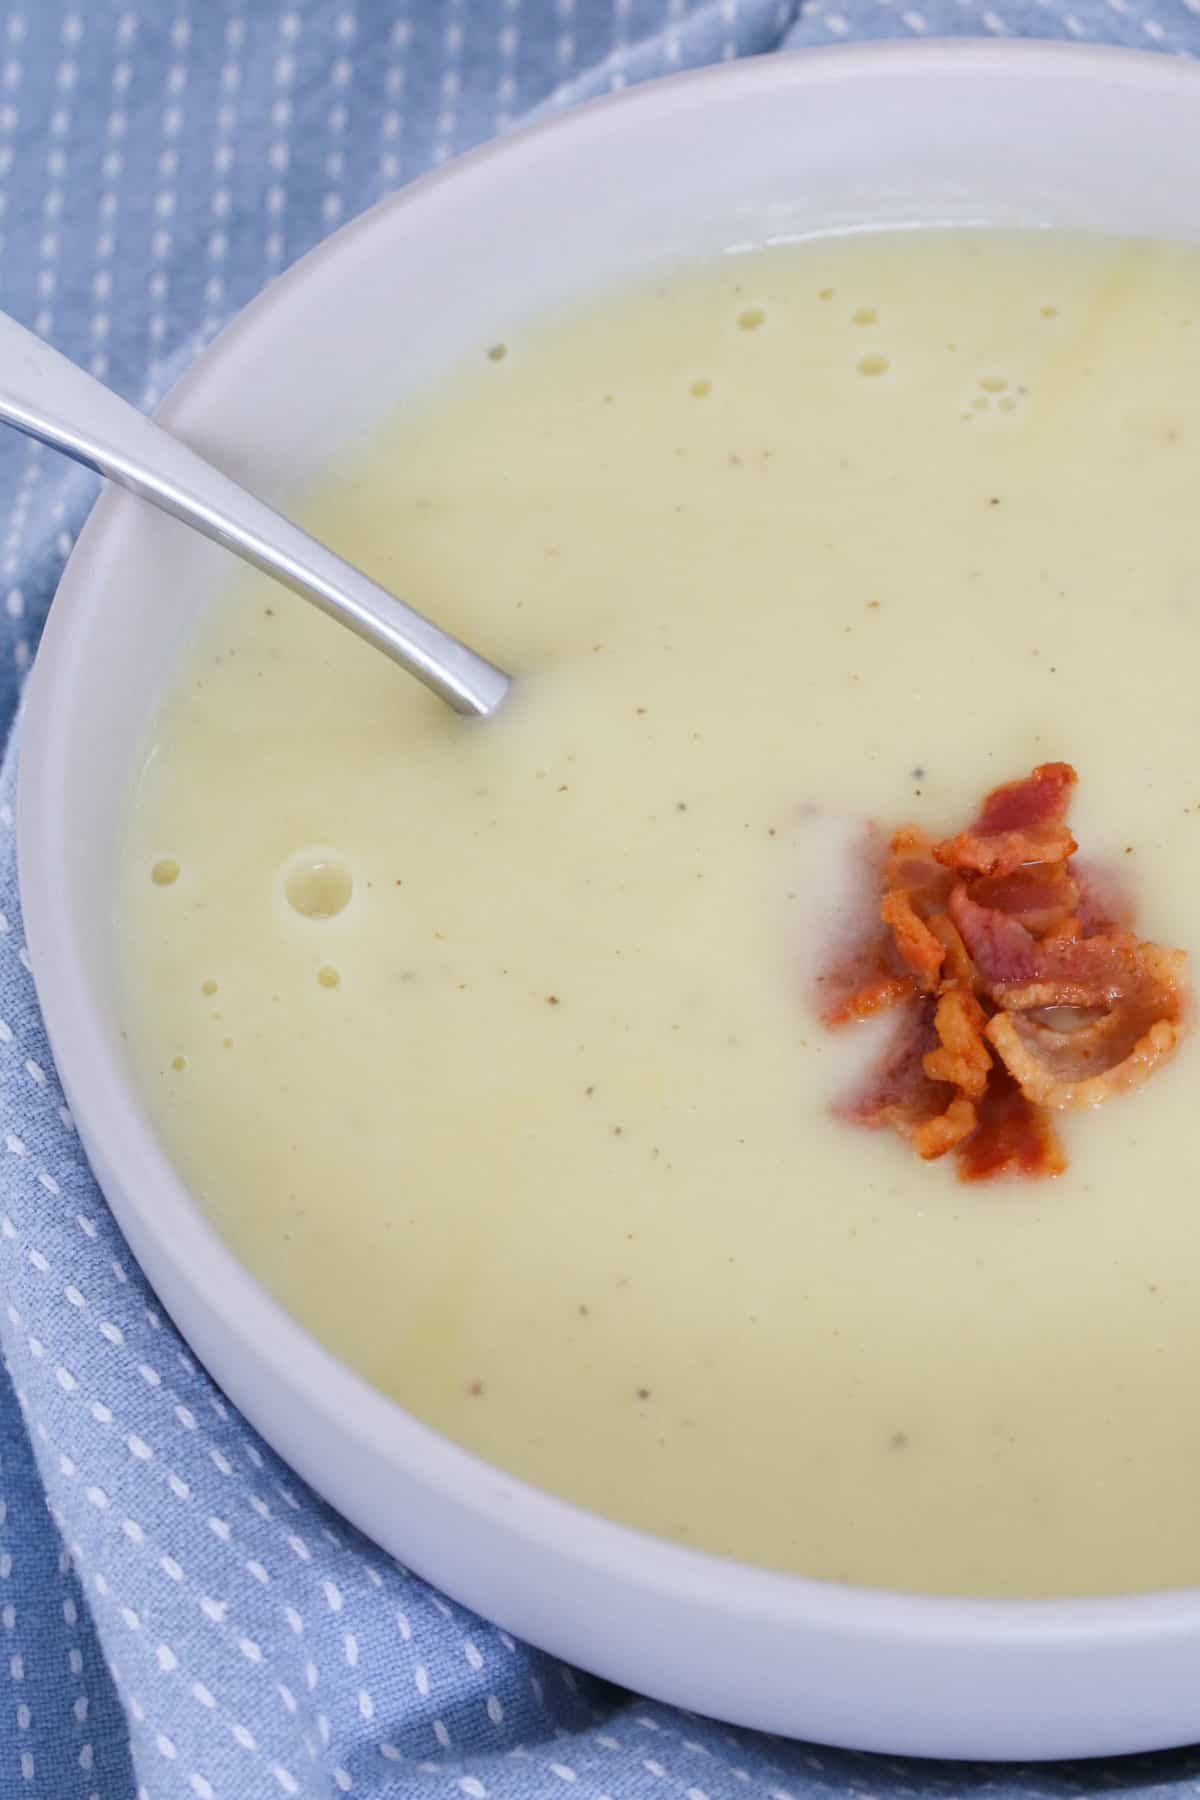 Bacon on top of a bowl of creamy vegetable soup.